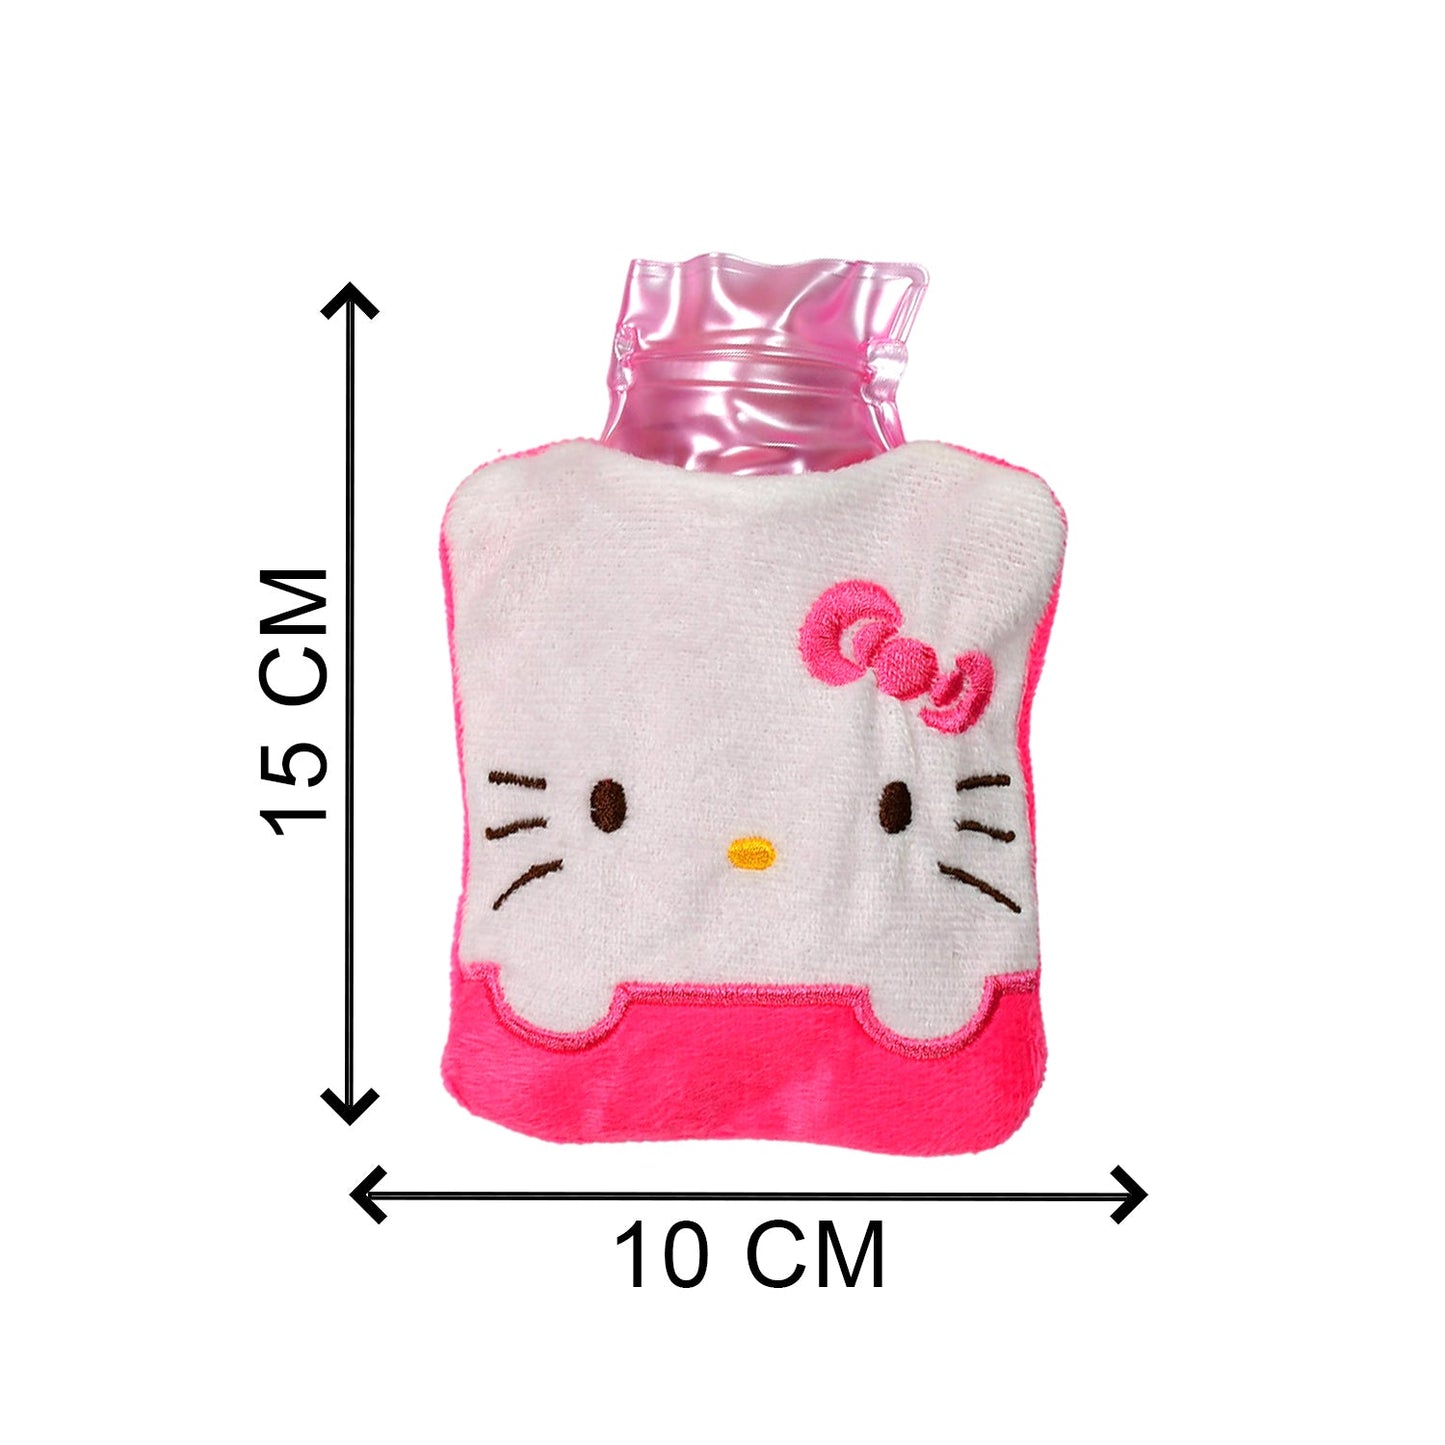 6520 Pink Hello Kitty small Hot Water Bag with Cover for Pain Relief, Neck, Shoulder Pain and Hand, Feet Warmer, Menstrual Cramps. 